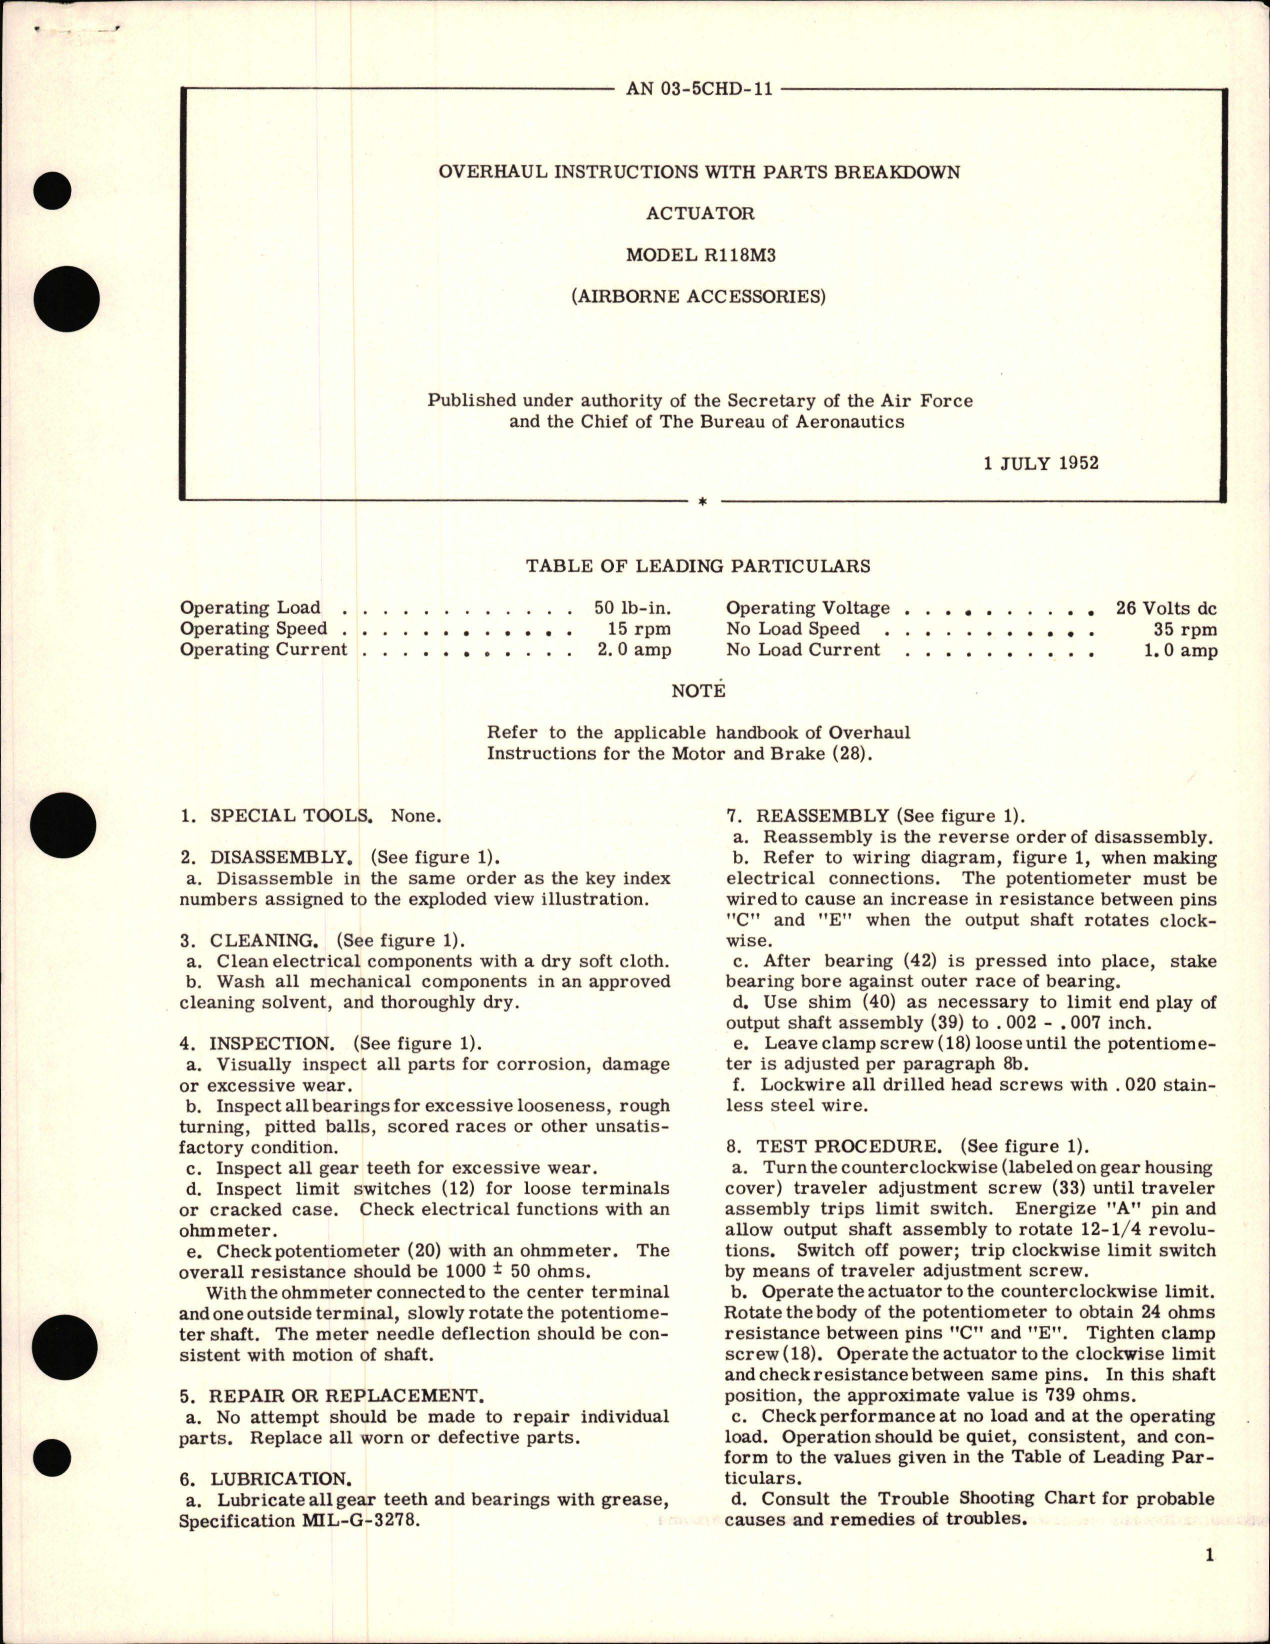 Sample page 1 from AirCorps Library document: Overhaul Instructions with Parts Breakdown for Actuator Model R118M3